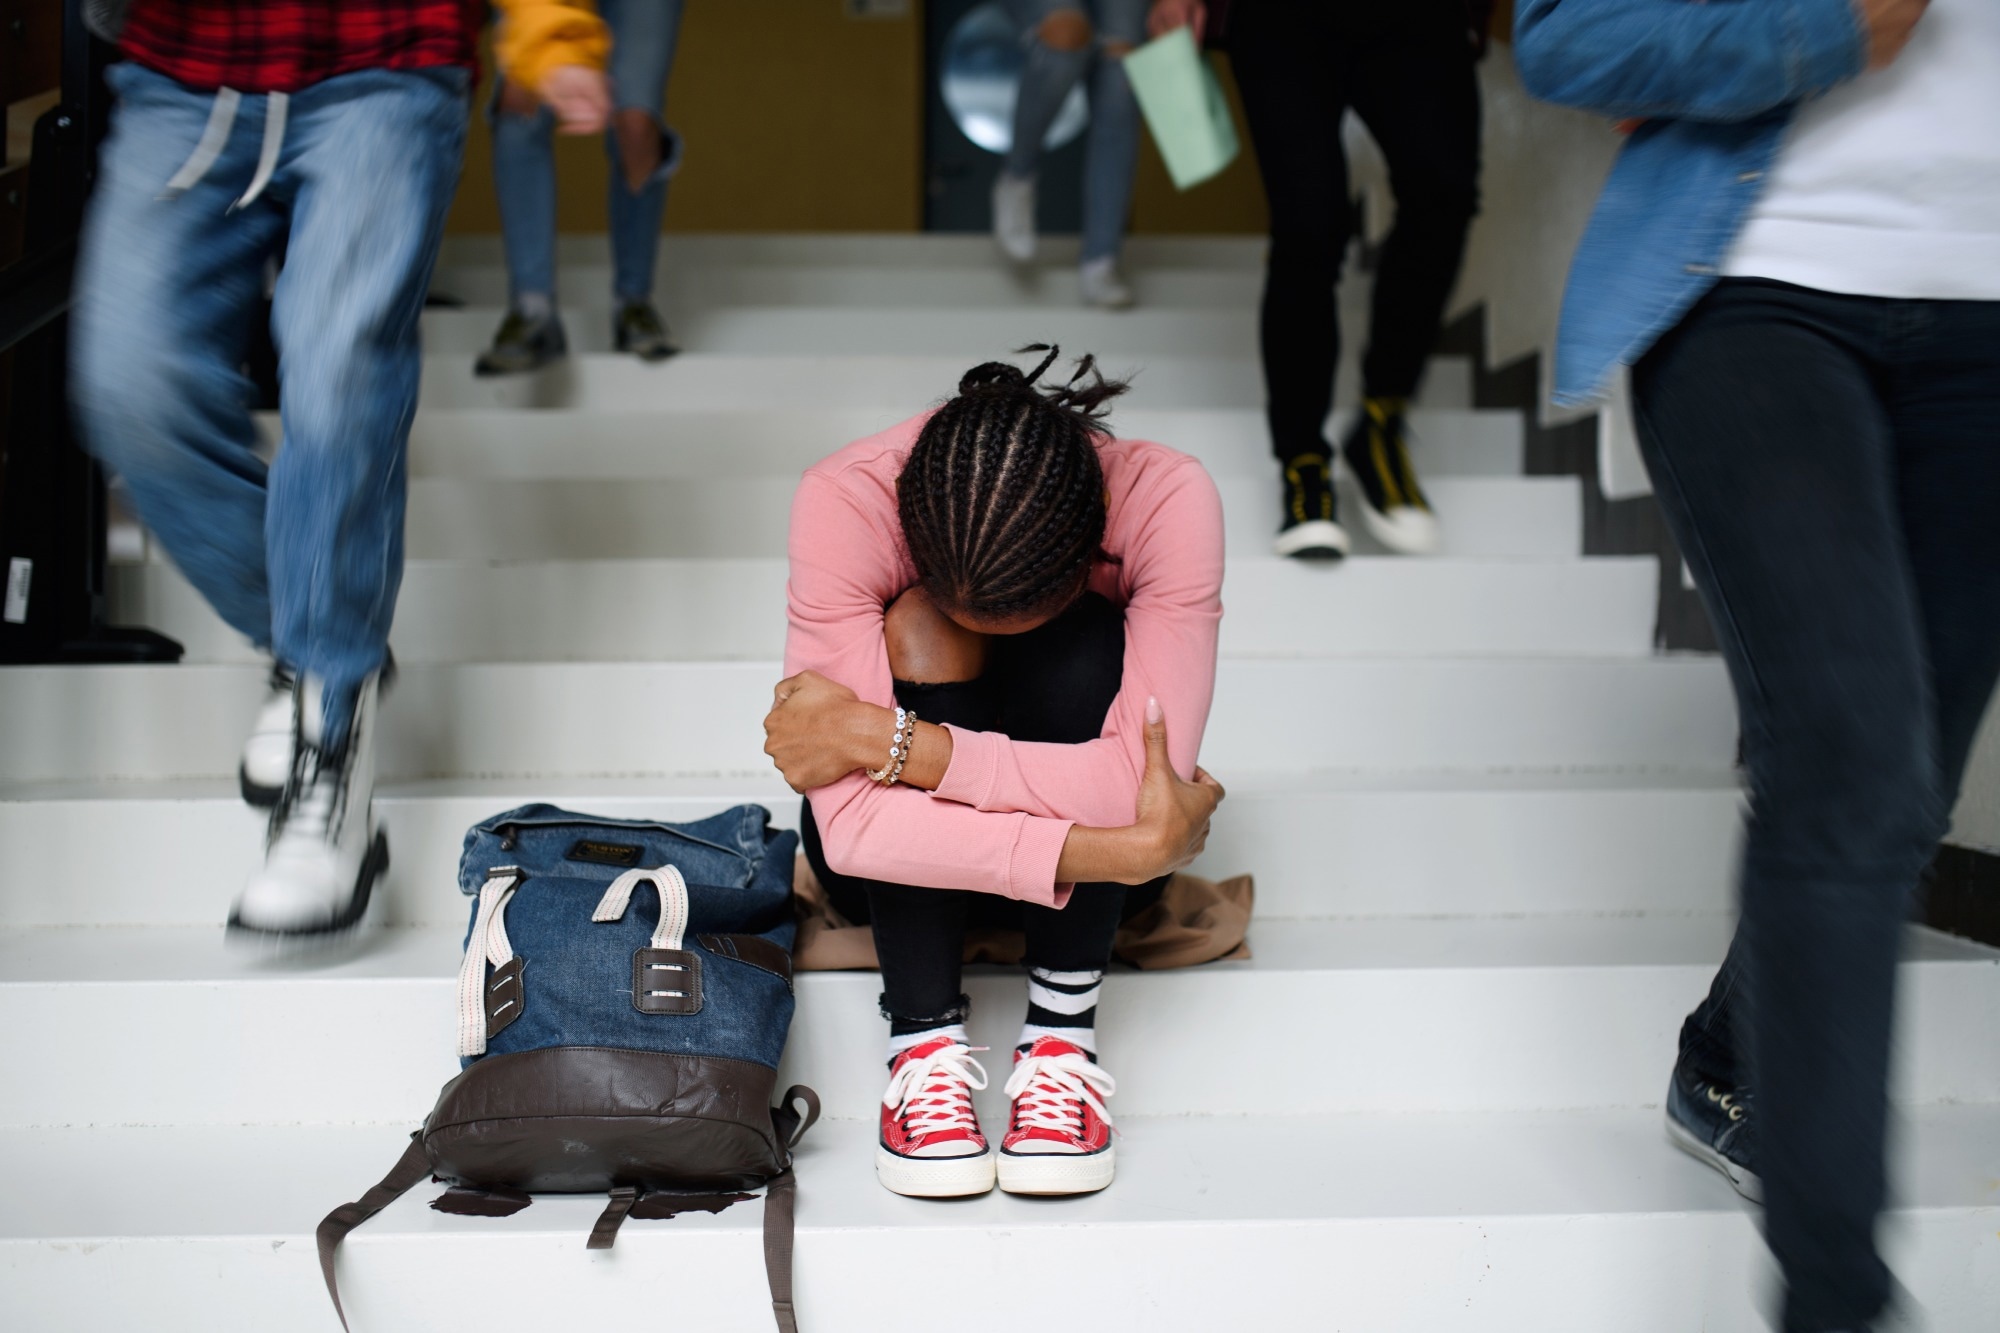 Study: Prevalence of Mental Health Diagnosis Among Commercially Insured Children and Adolescents in the United States Before and During the COVID-19 Pandemic. Image Credit: Ground Picture/Shutterstock.com